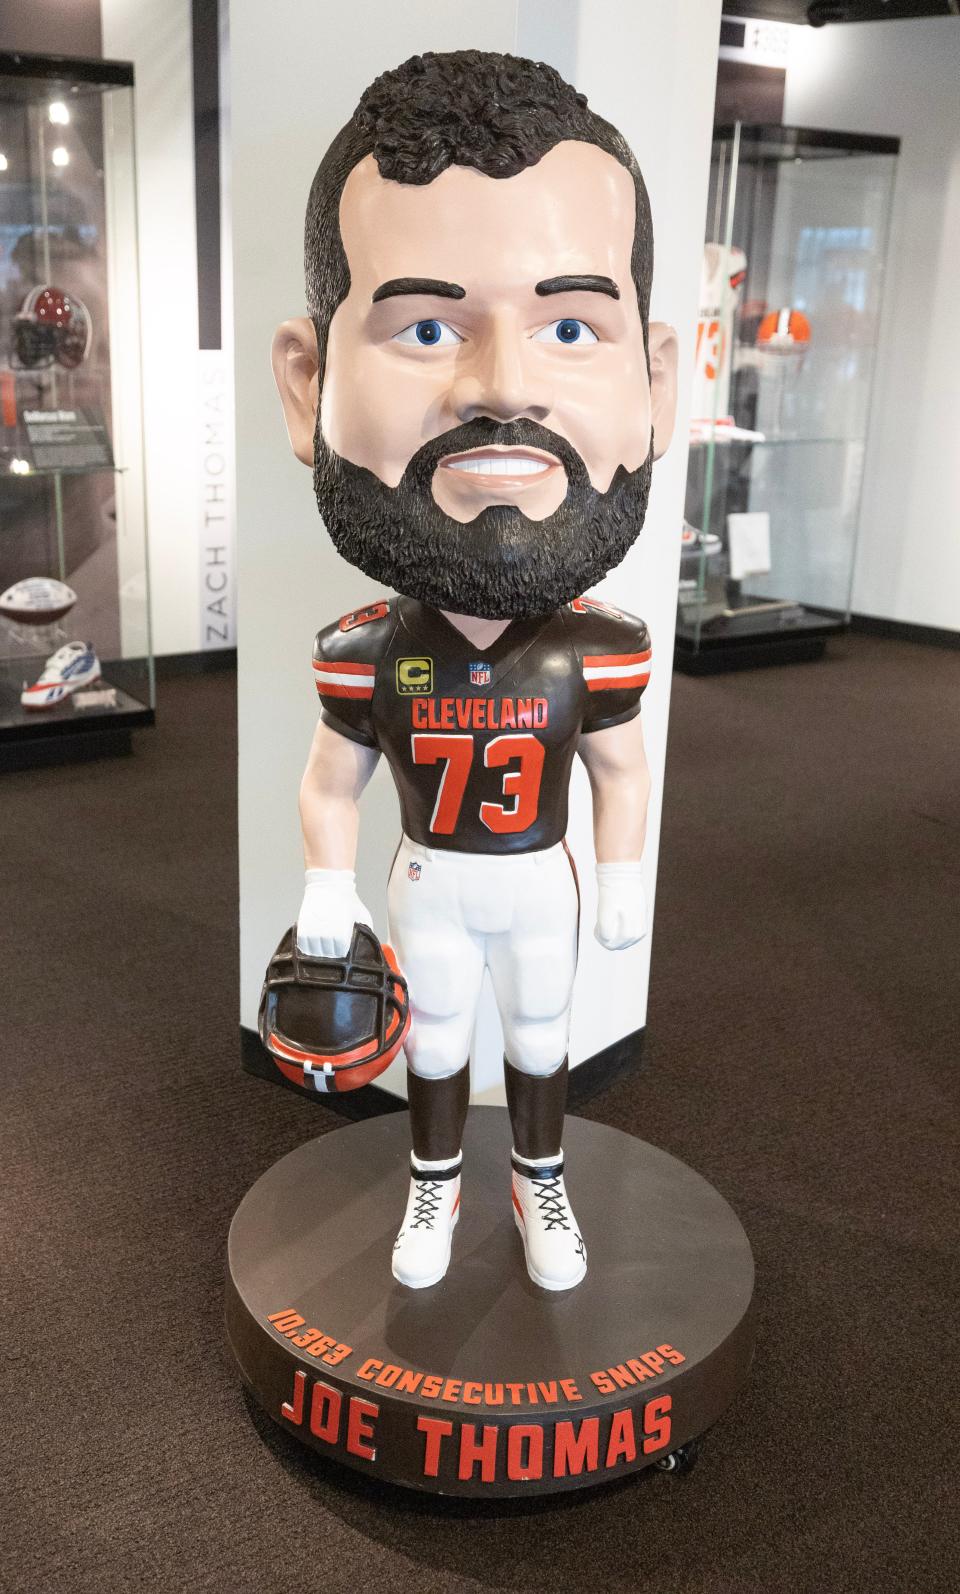 Six former Cleveland Browns players are represented in giant bobblehead figures on display in the newest Pro Football Hall of Fame exhibit, "A Legacy Unleashed."